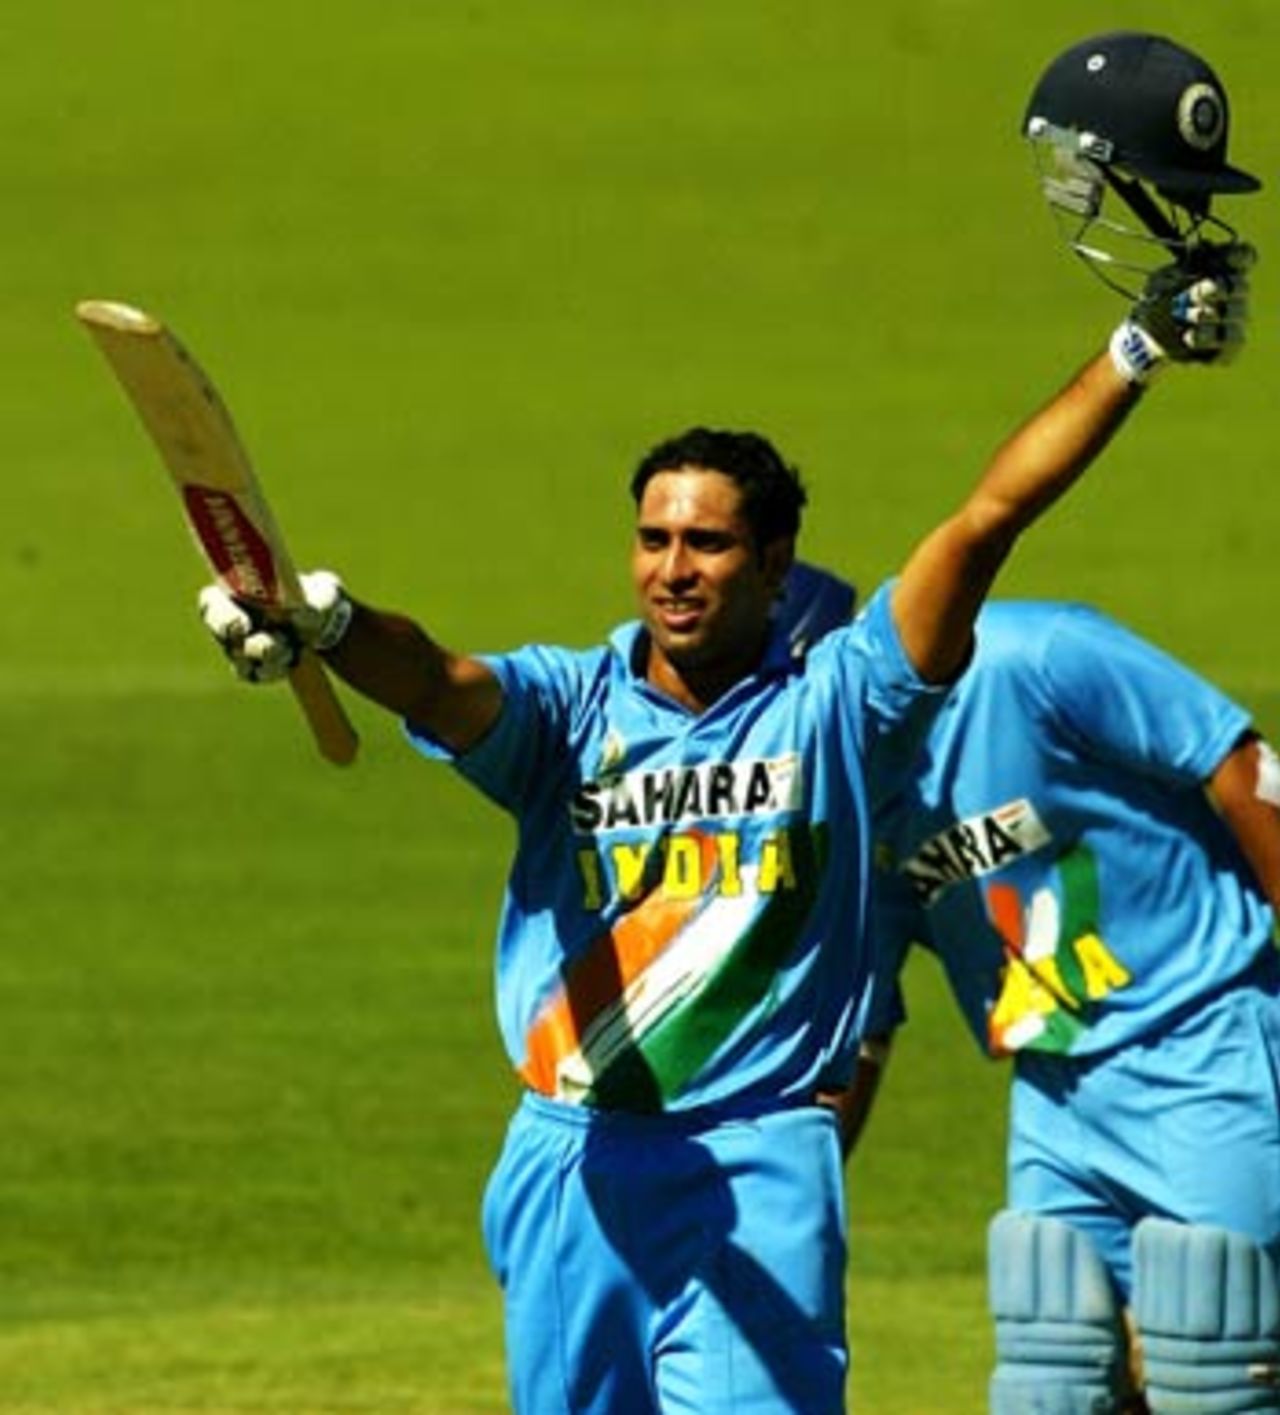 It was VVS Laxman who saved the day for India with a magnificent century, India v Zimbabwe, VB Series, 8th ODI, Adelaide, January 24, 2004